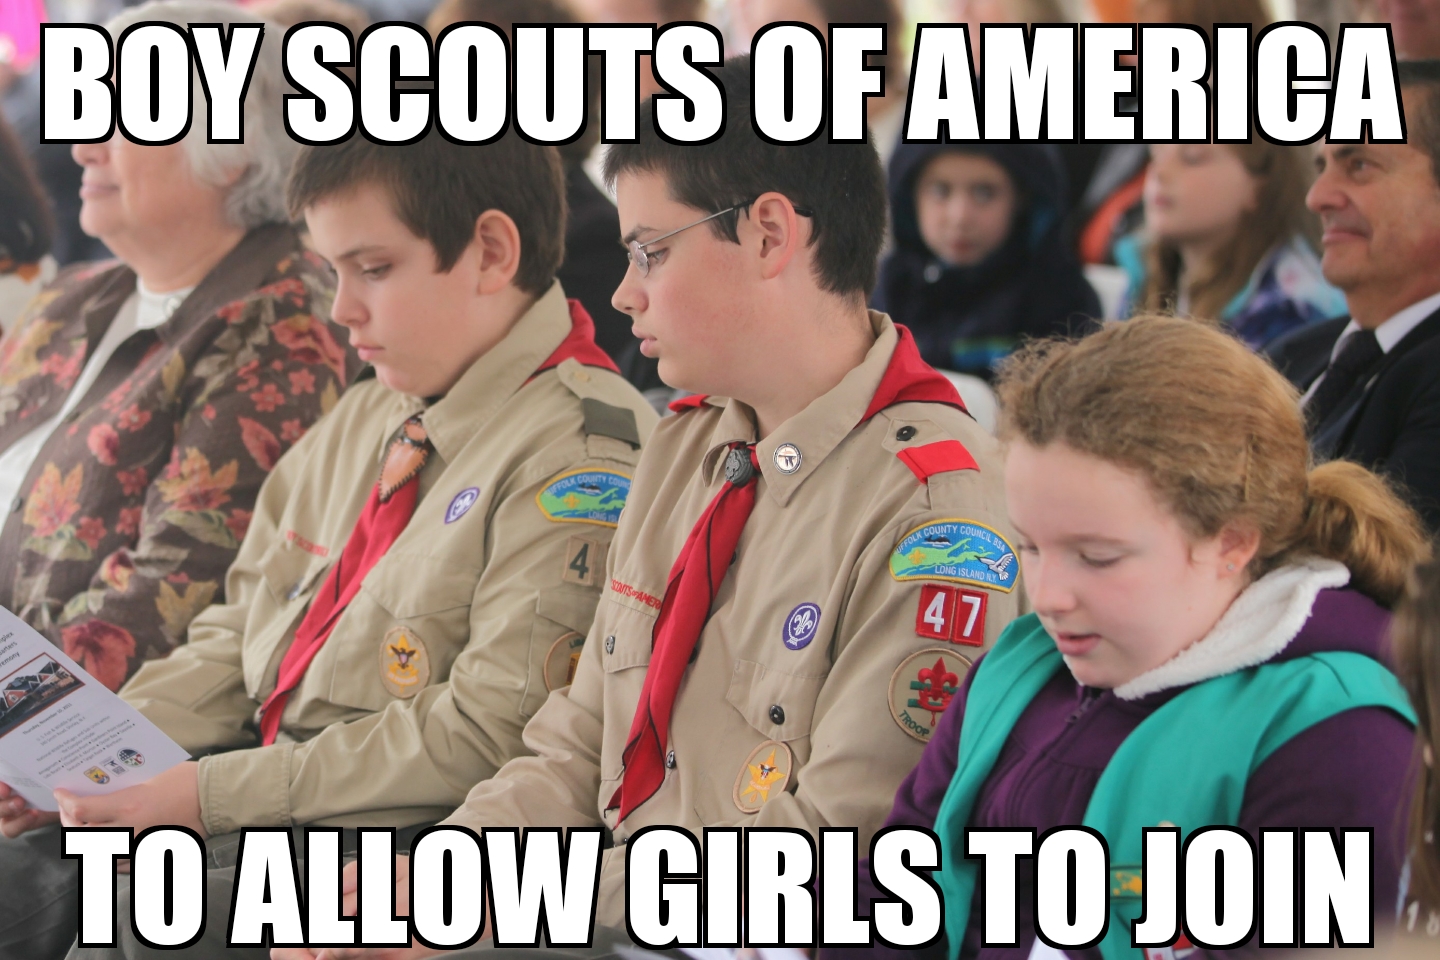 Boy Scouts to allow girls to join